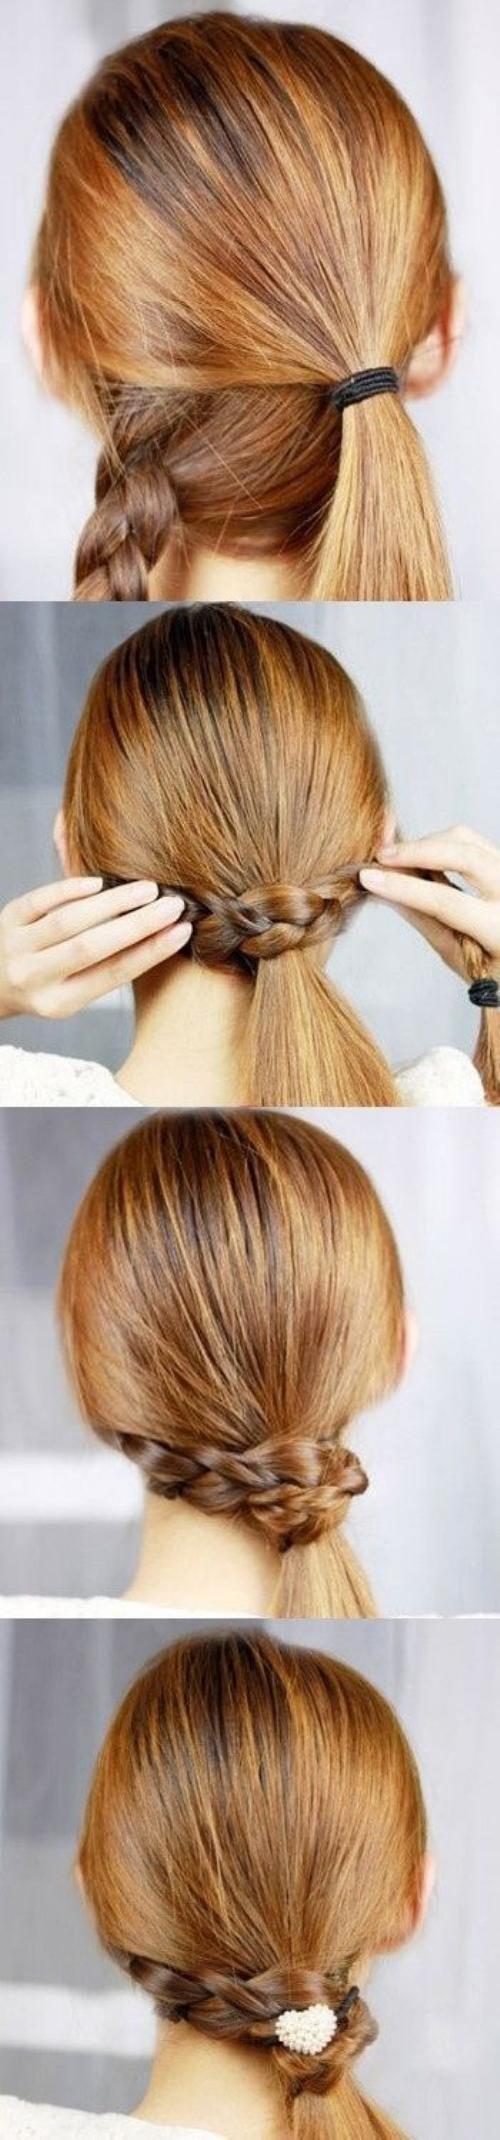 Diy 2 3 15 Lovely and Useful Hairstyle Tutorials